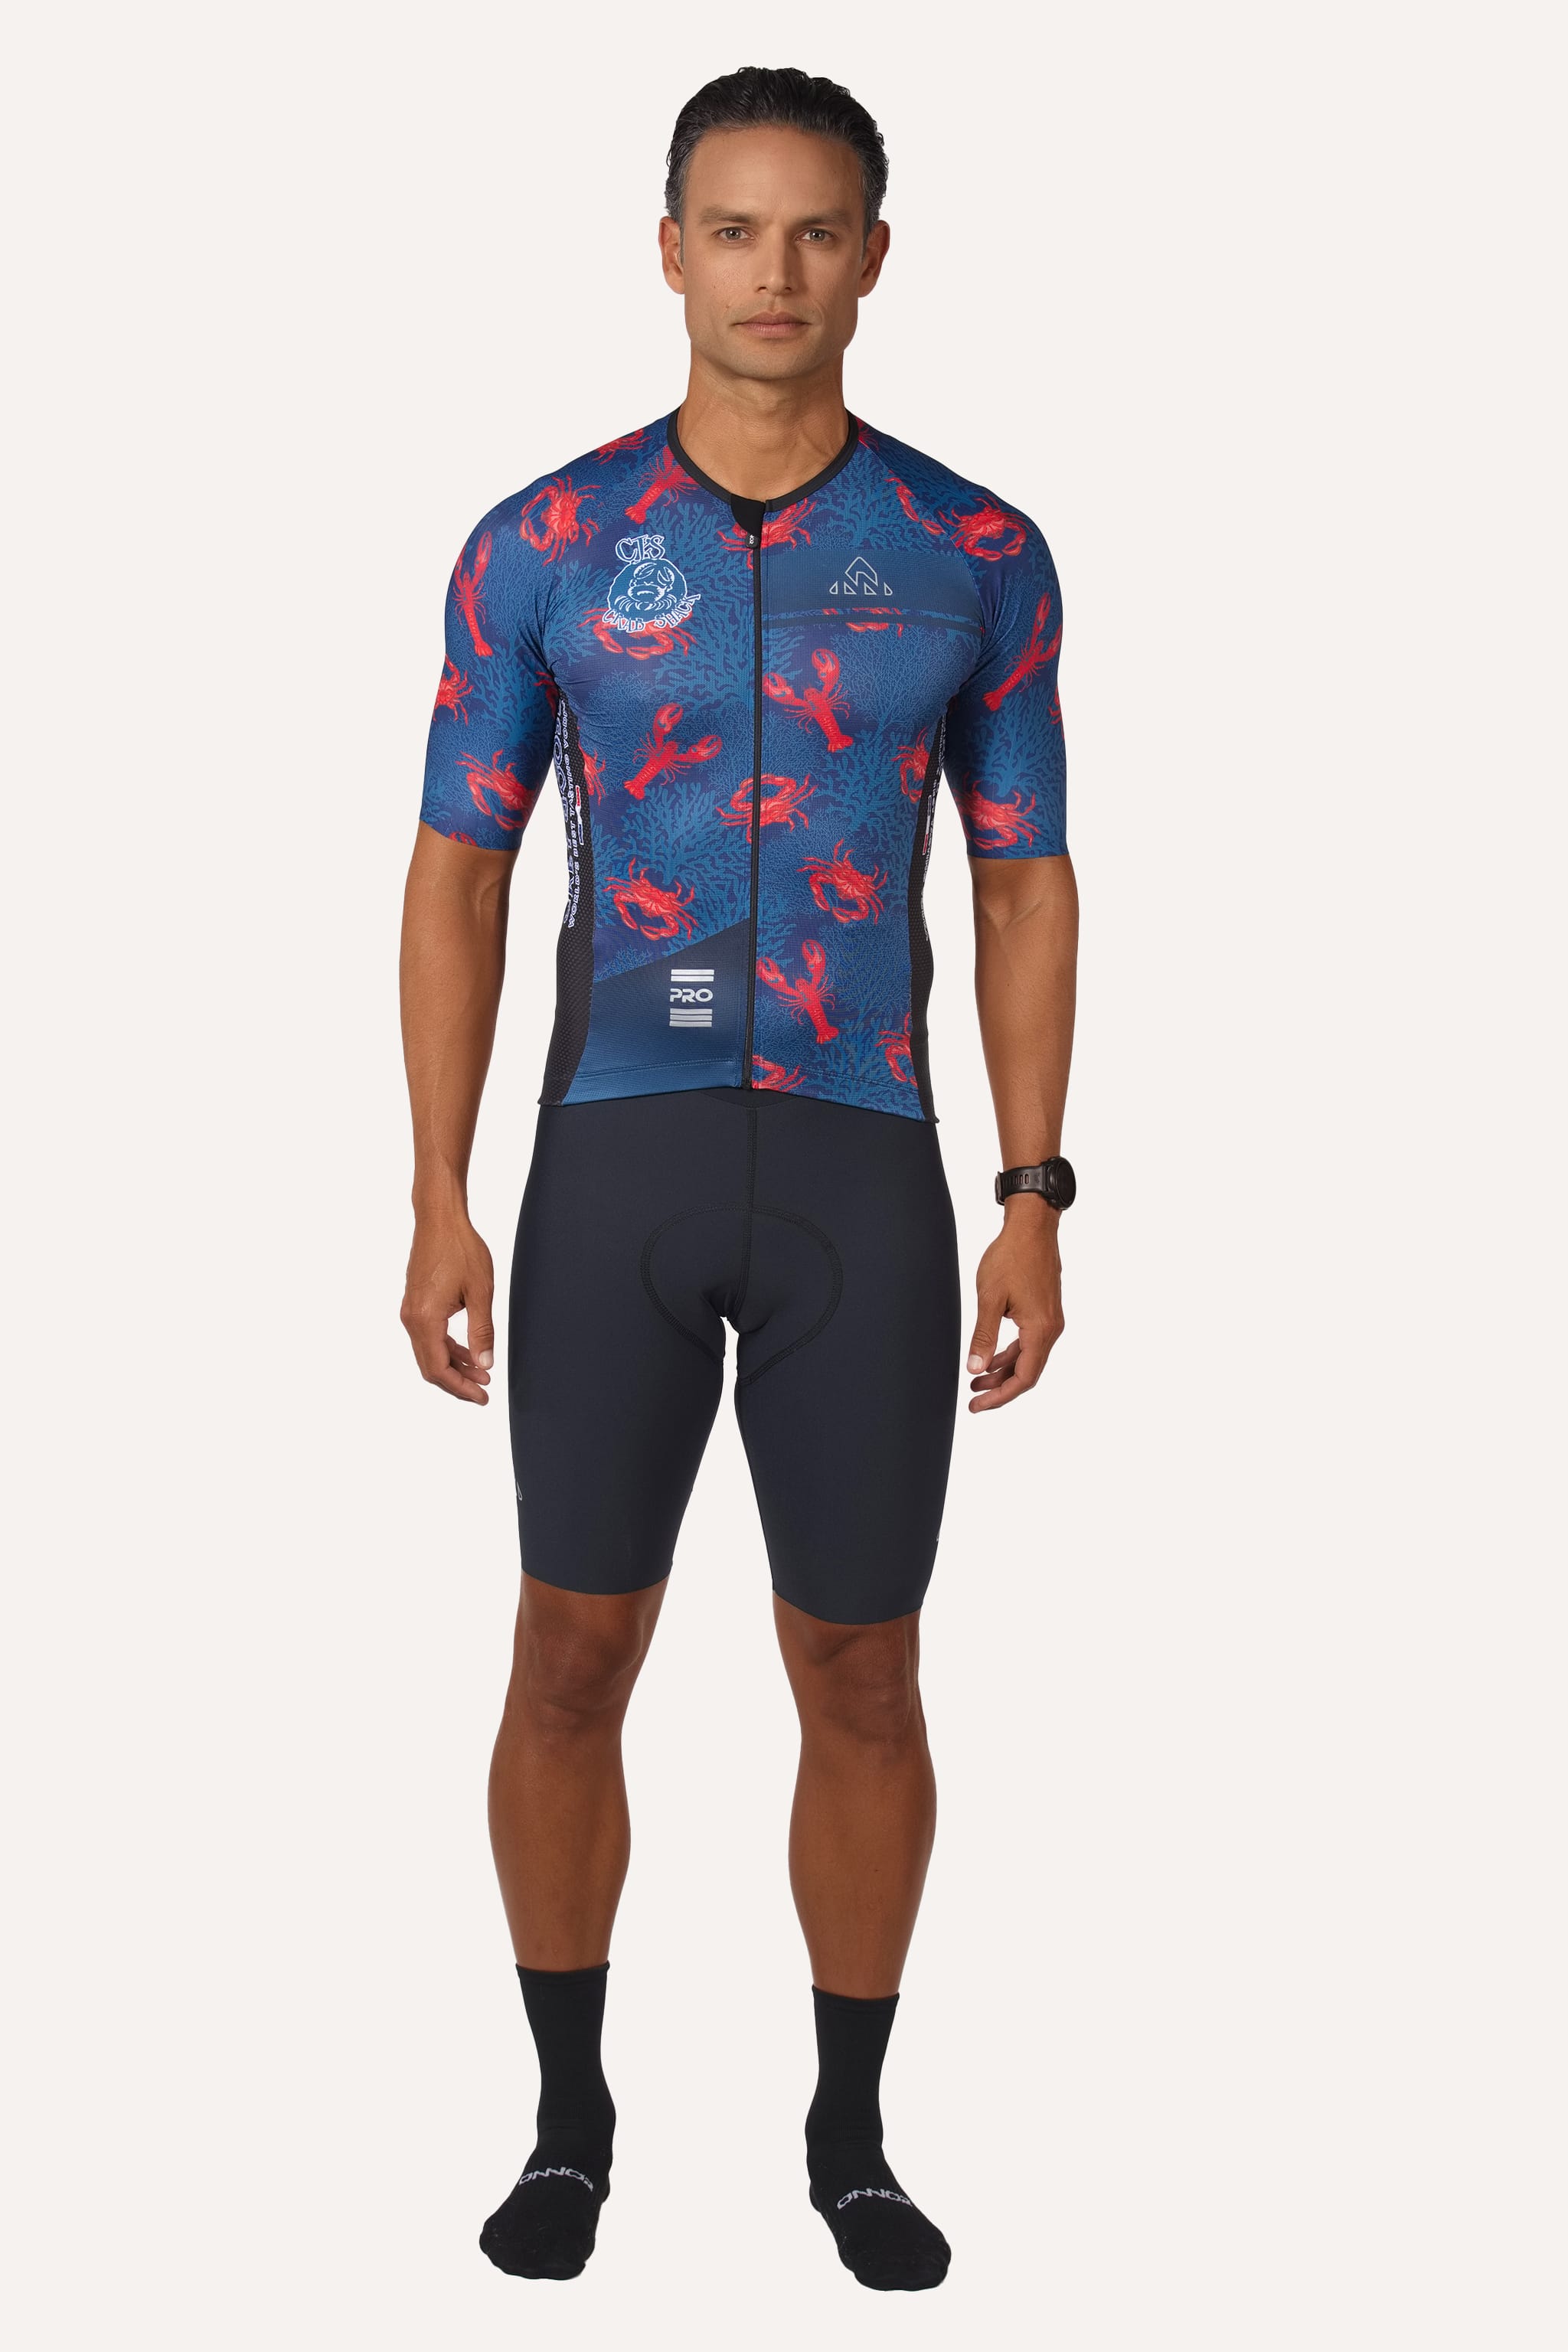 Personalized Cycling Apparel Miami